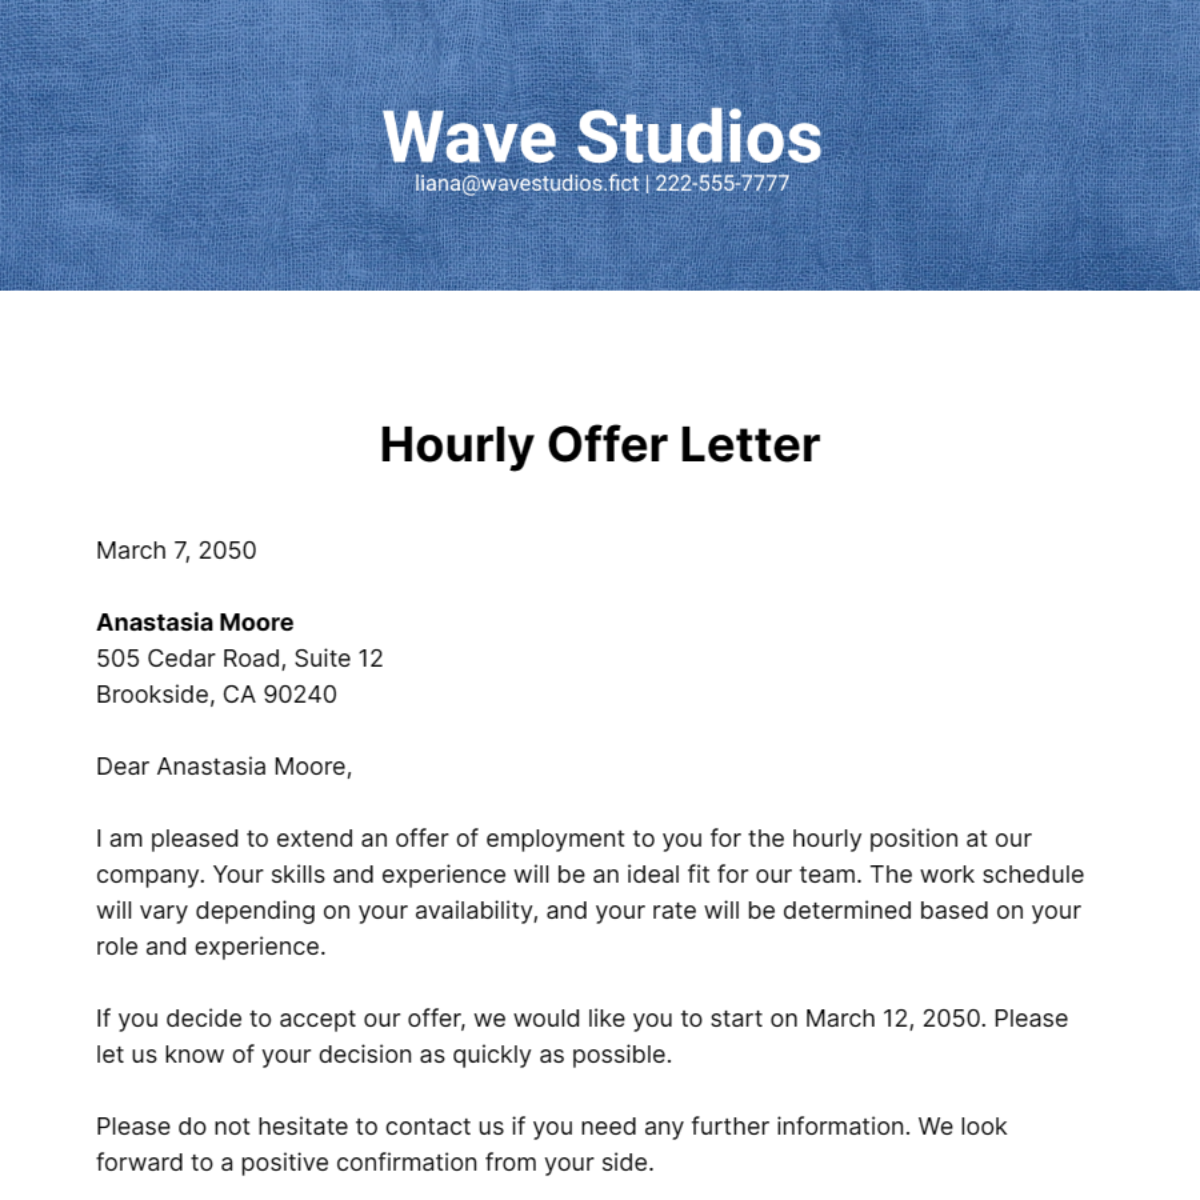 Hourly Offer Letter Template